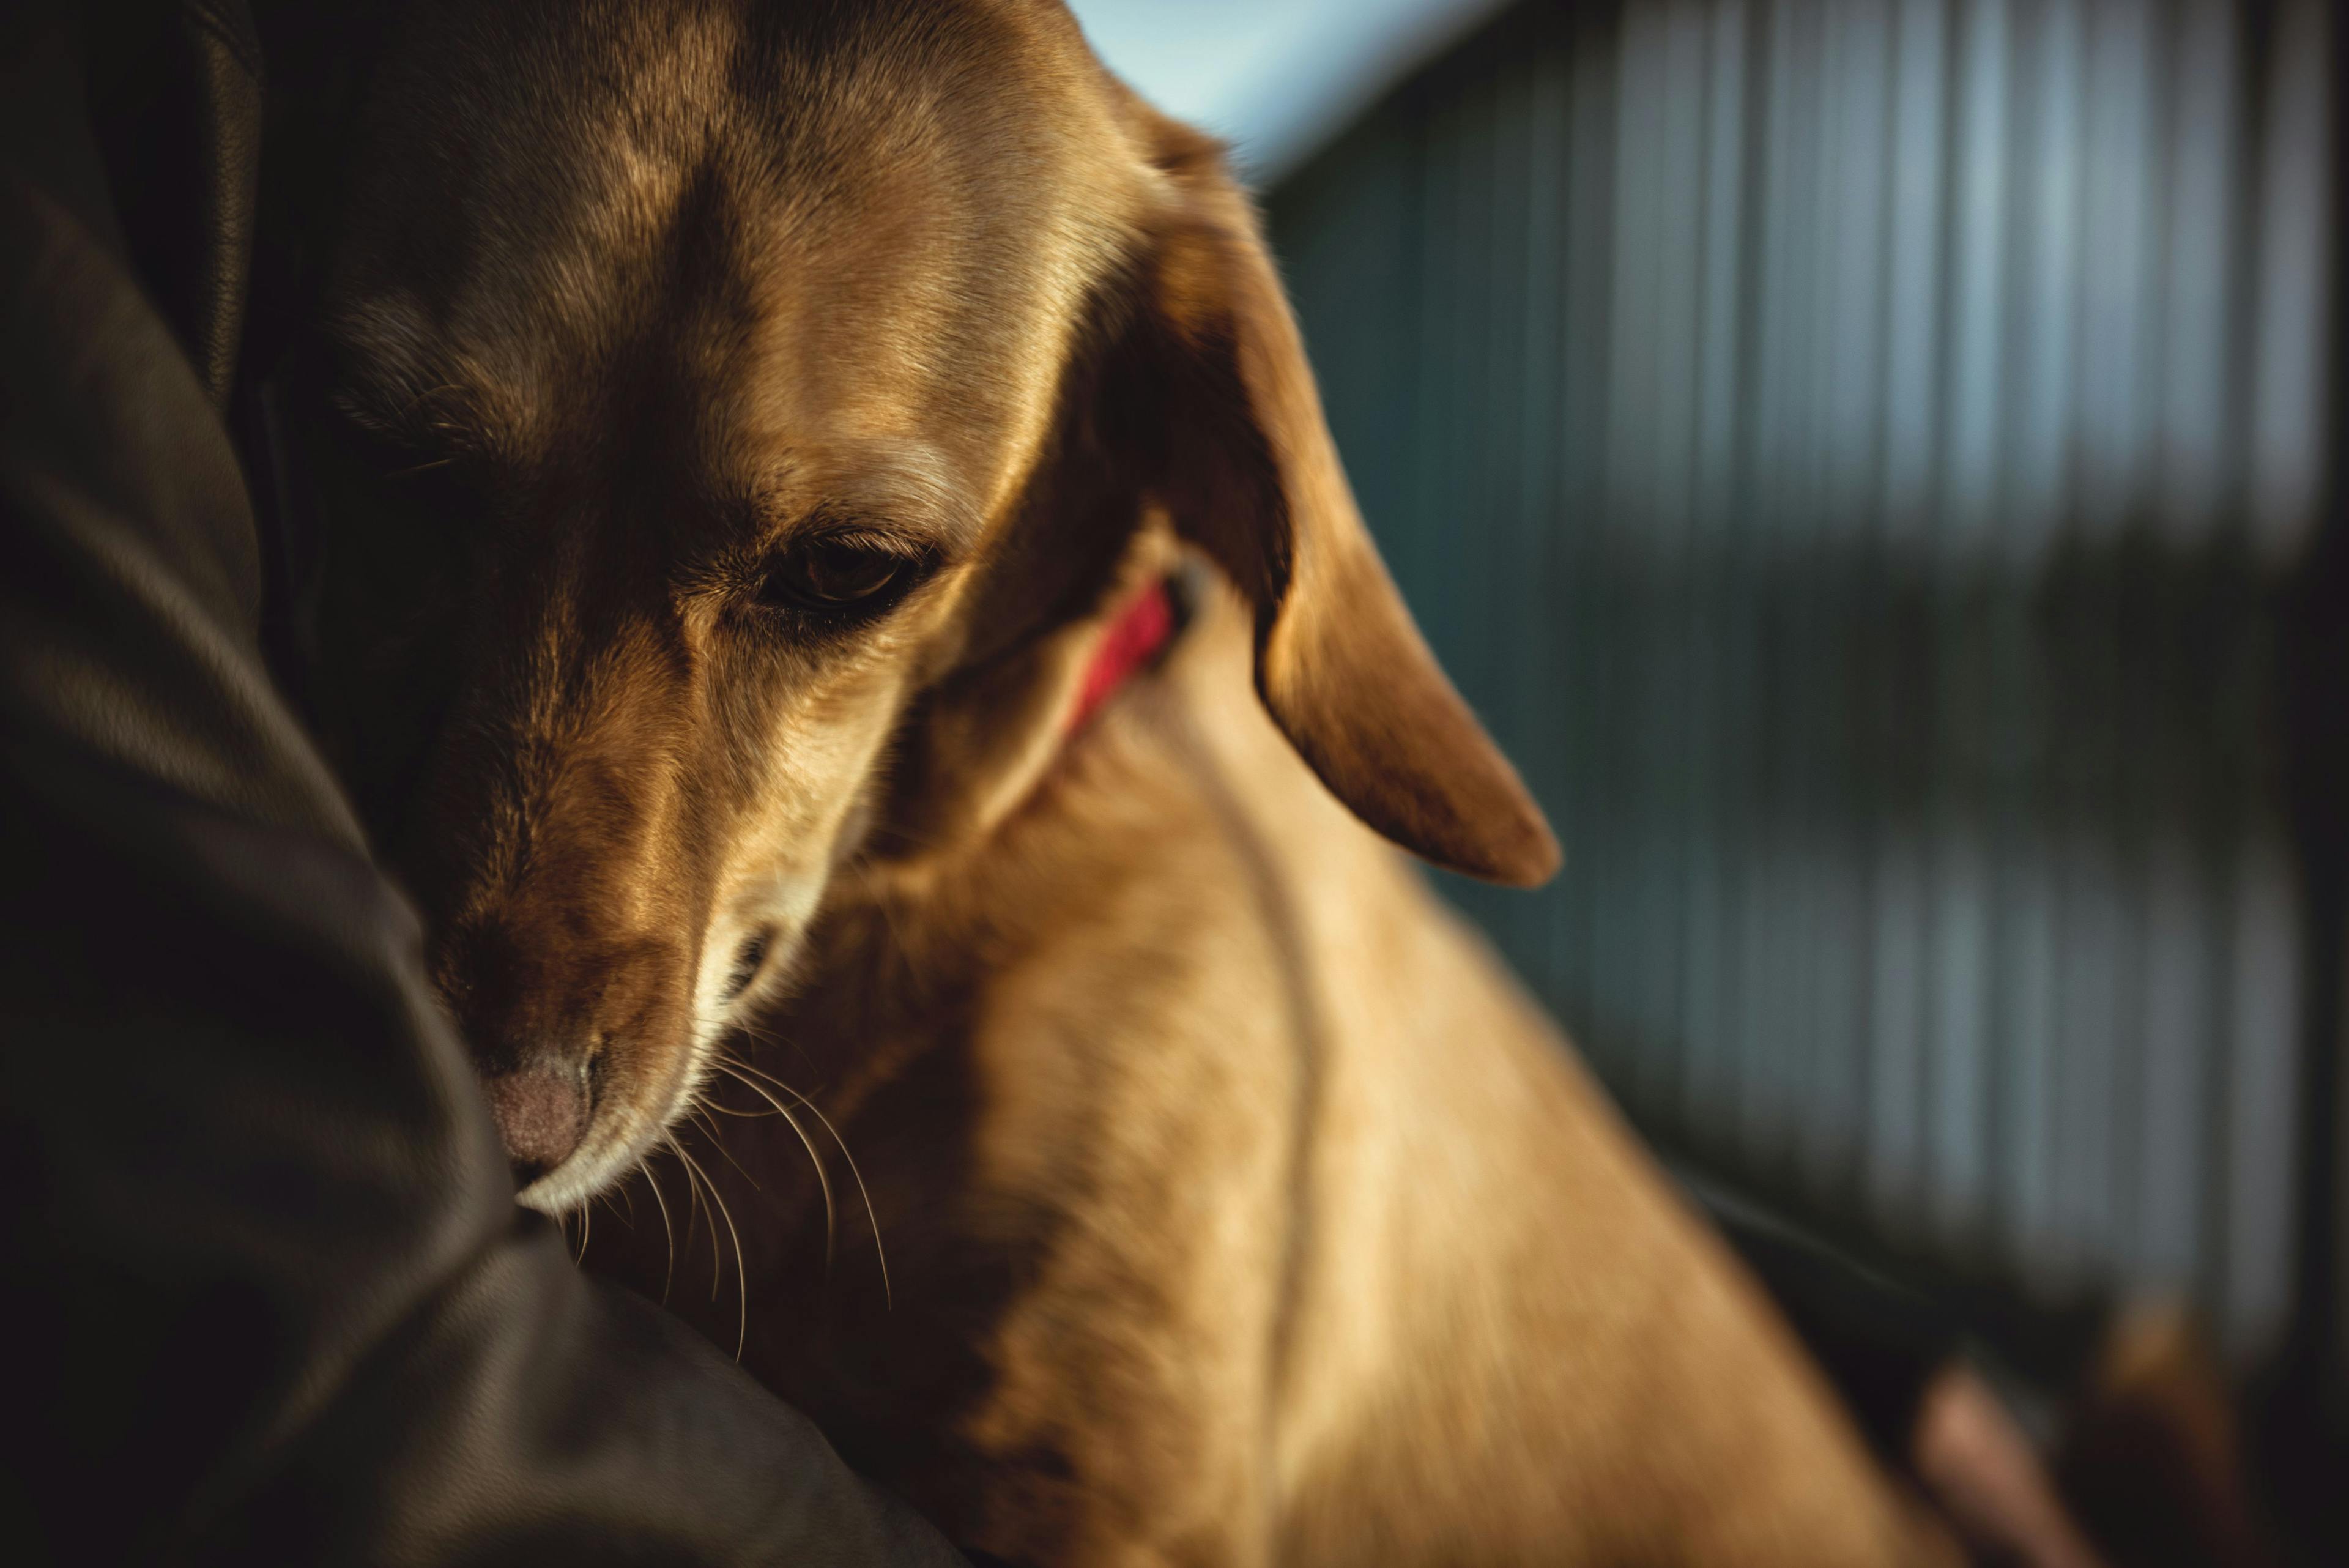 PetHub joins forces with National Band & Tag Company to help lost pets return home